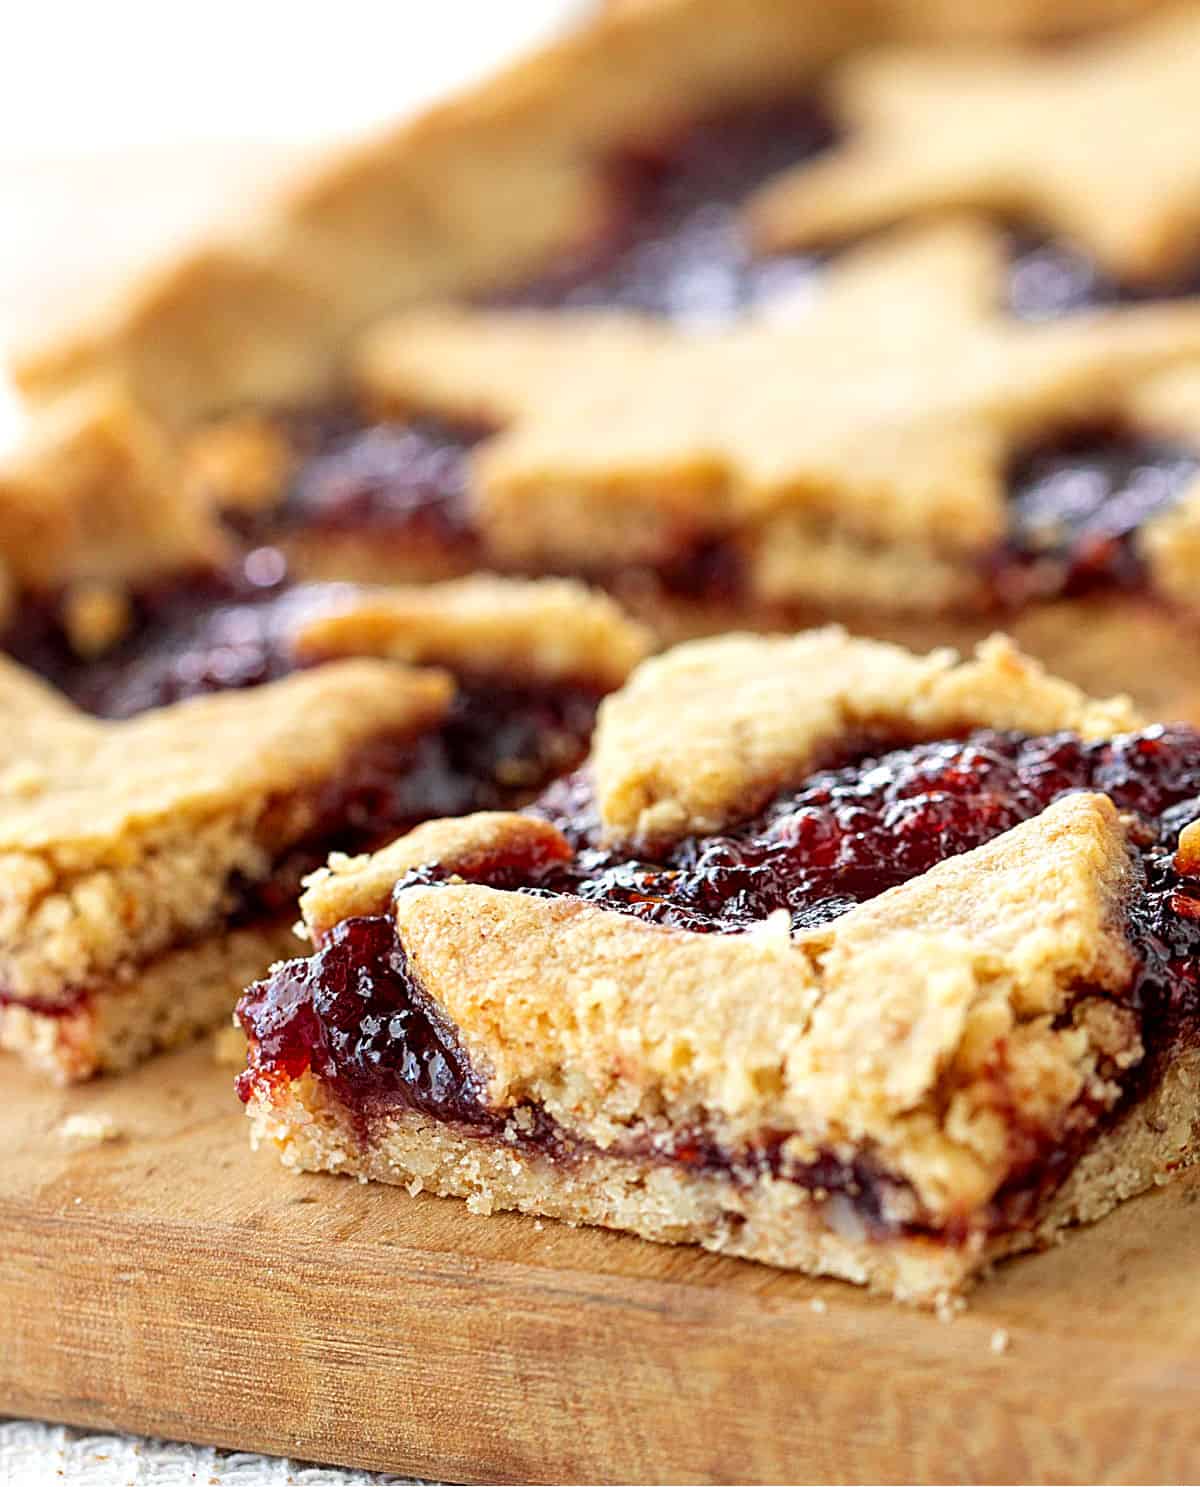 Squares of raspberry linzer torte on light colored wooden board